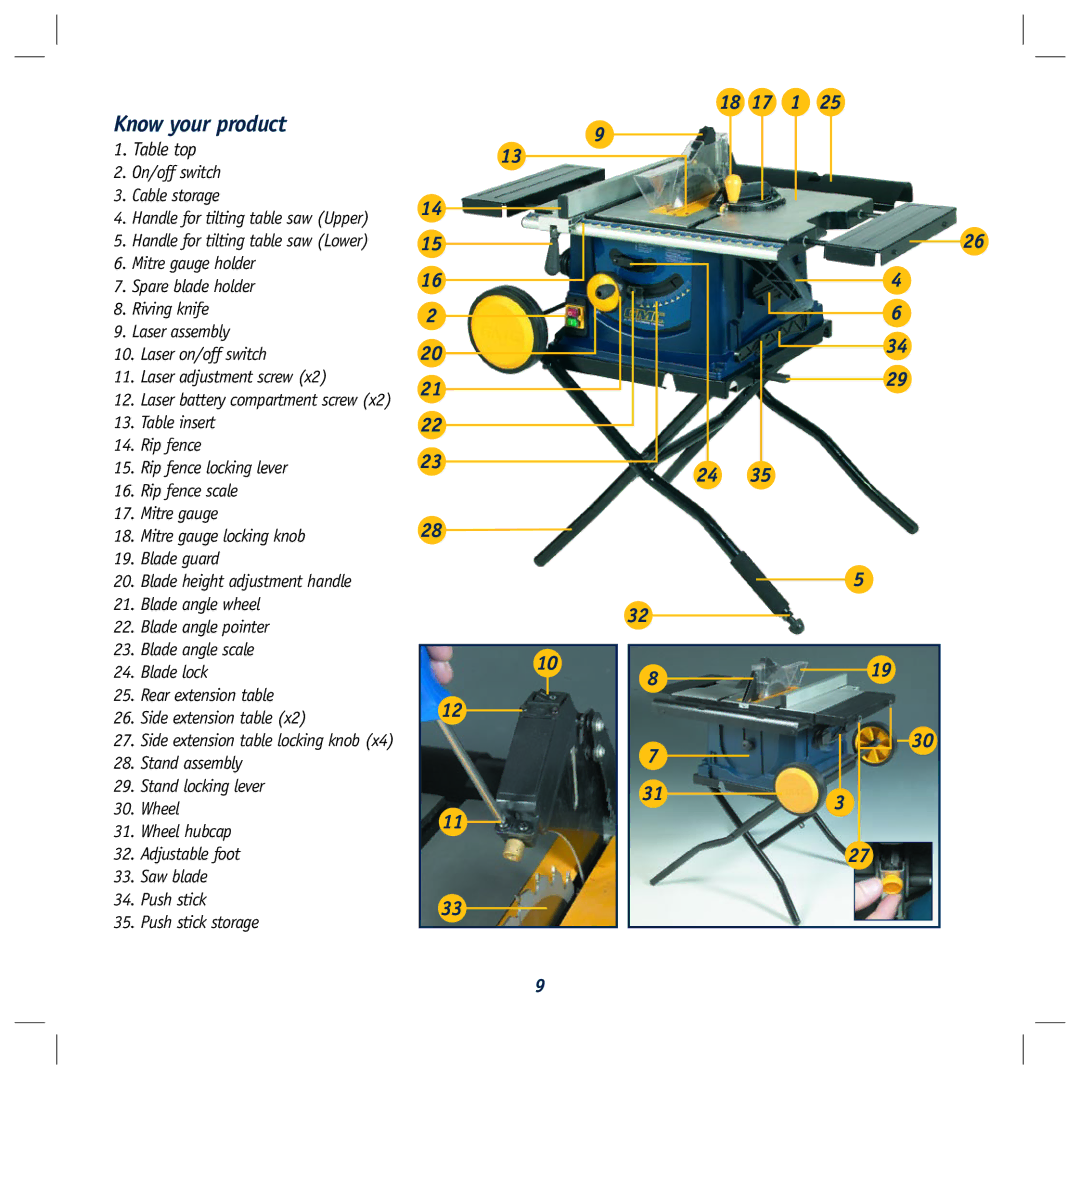 Global Machinery Company LS250TS2000W instruction manual Know your product, Table top, 18 17 1, 819, 313 